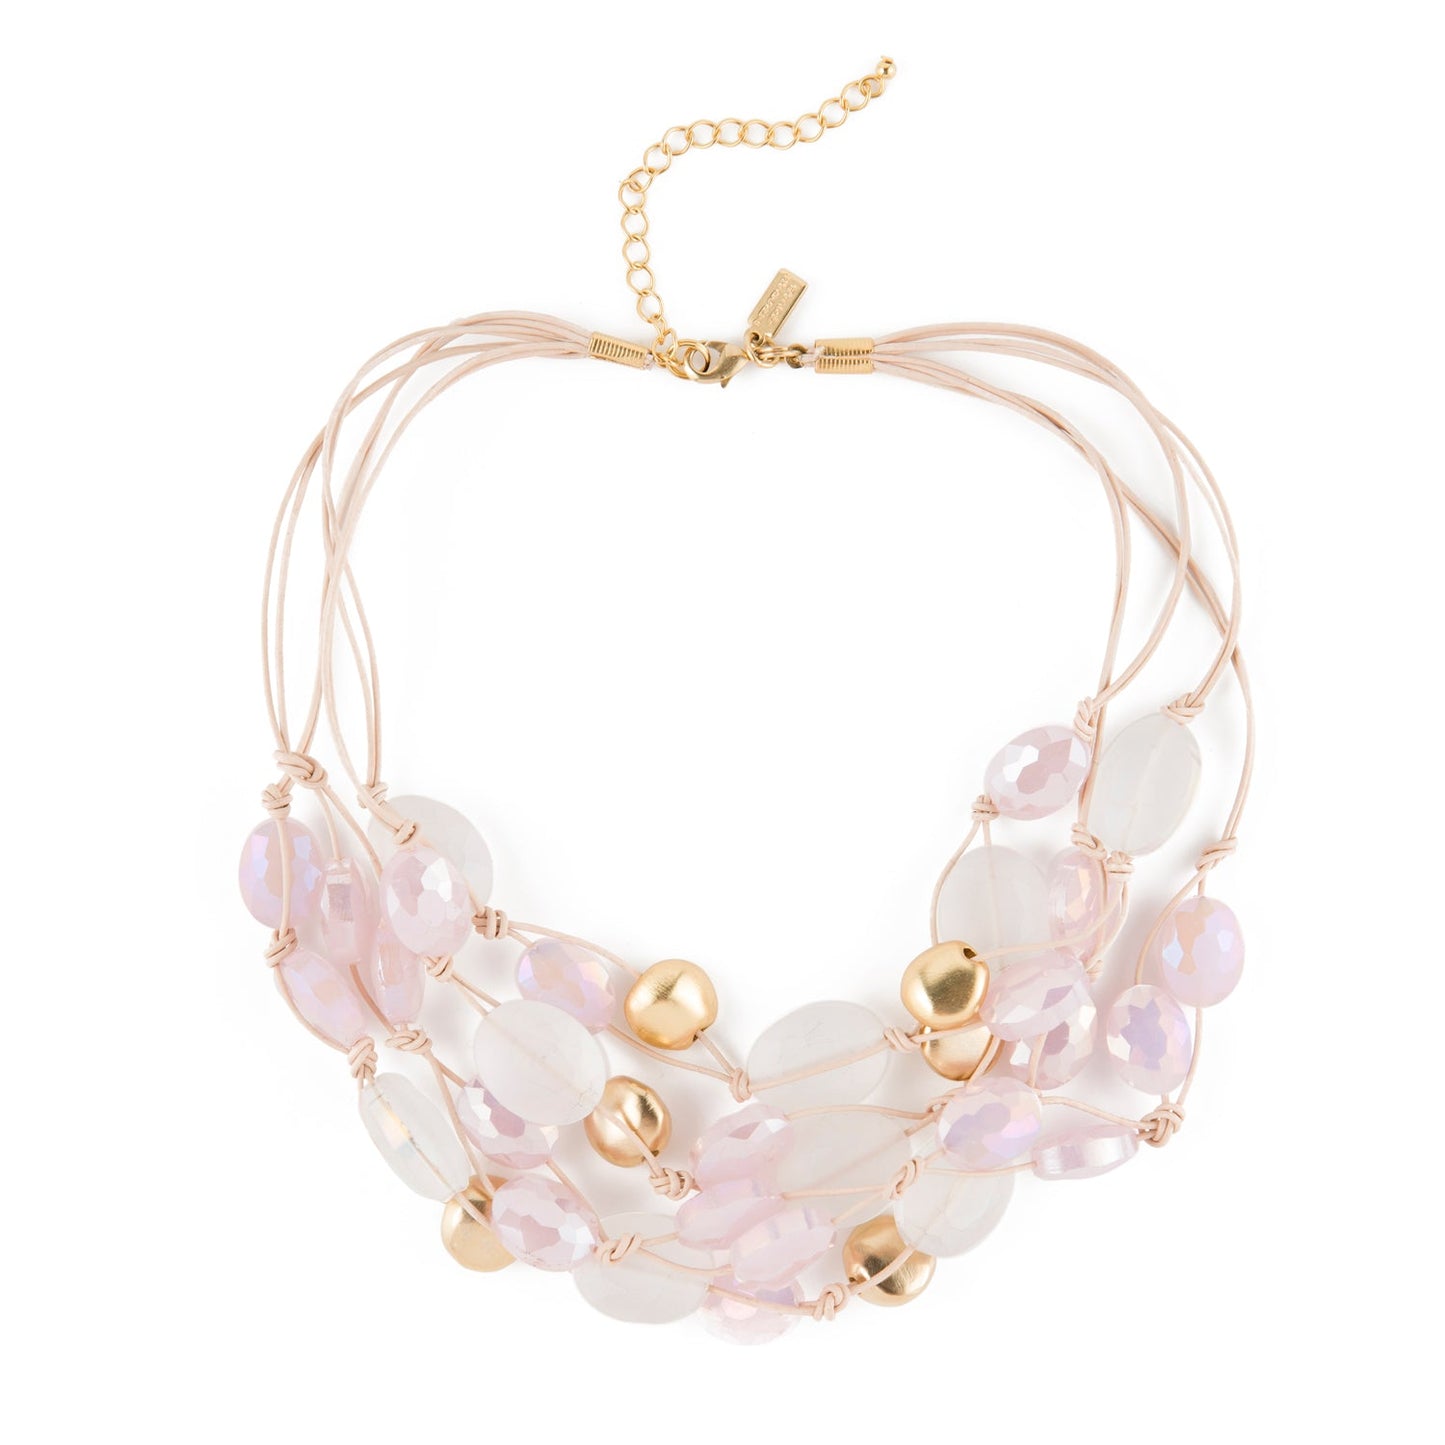 Matte White Crystal, Pink Velvet Crystal And Matte Gold Pebble Beads Putty Leather Cluster Necklace